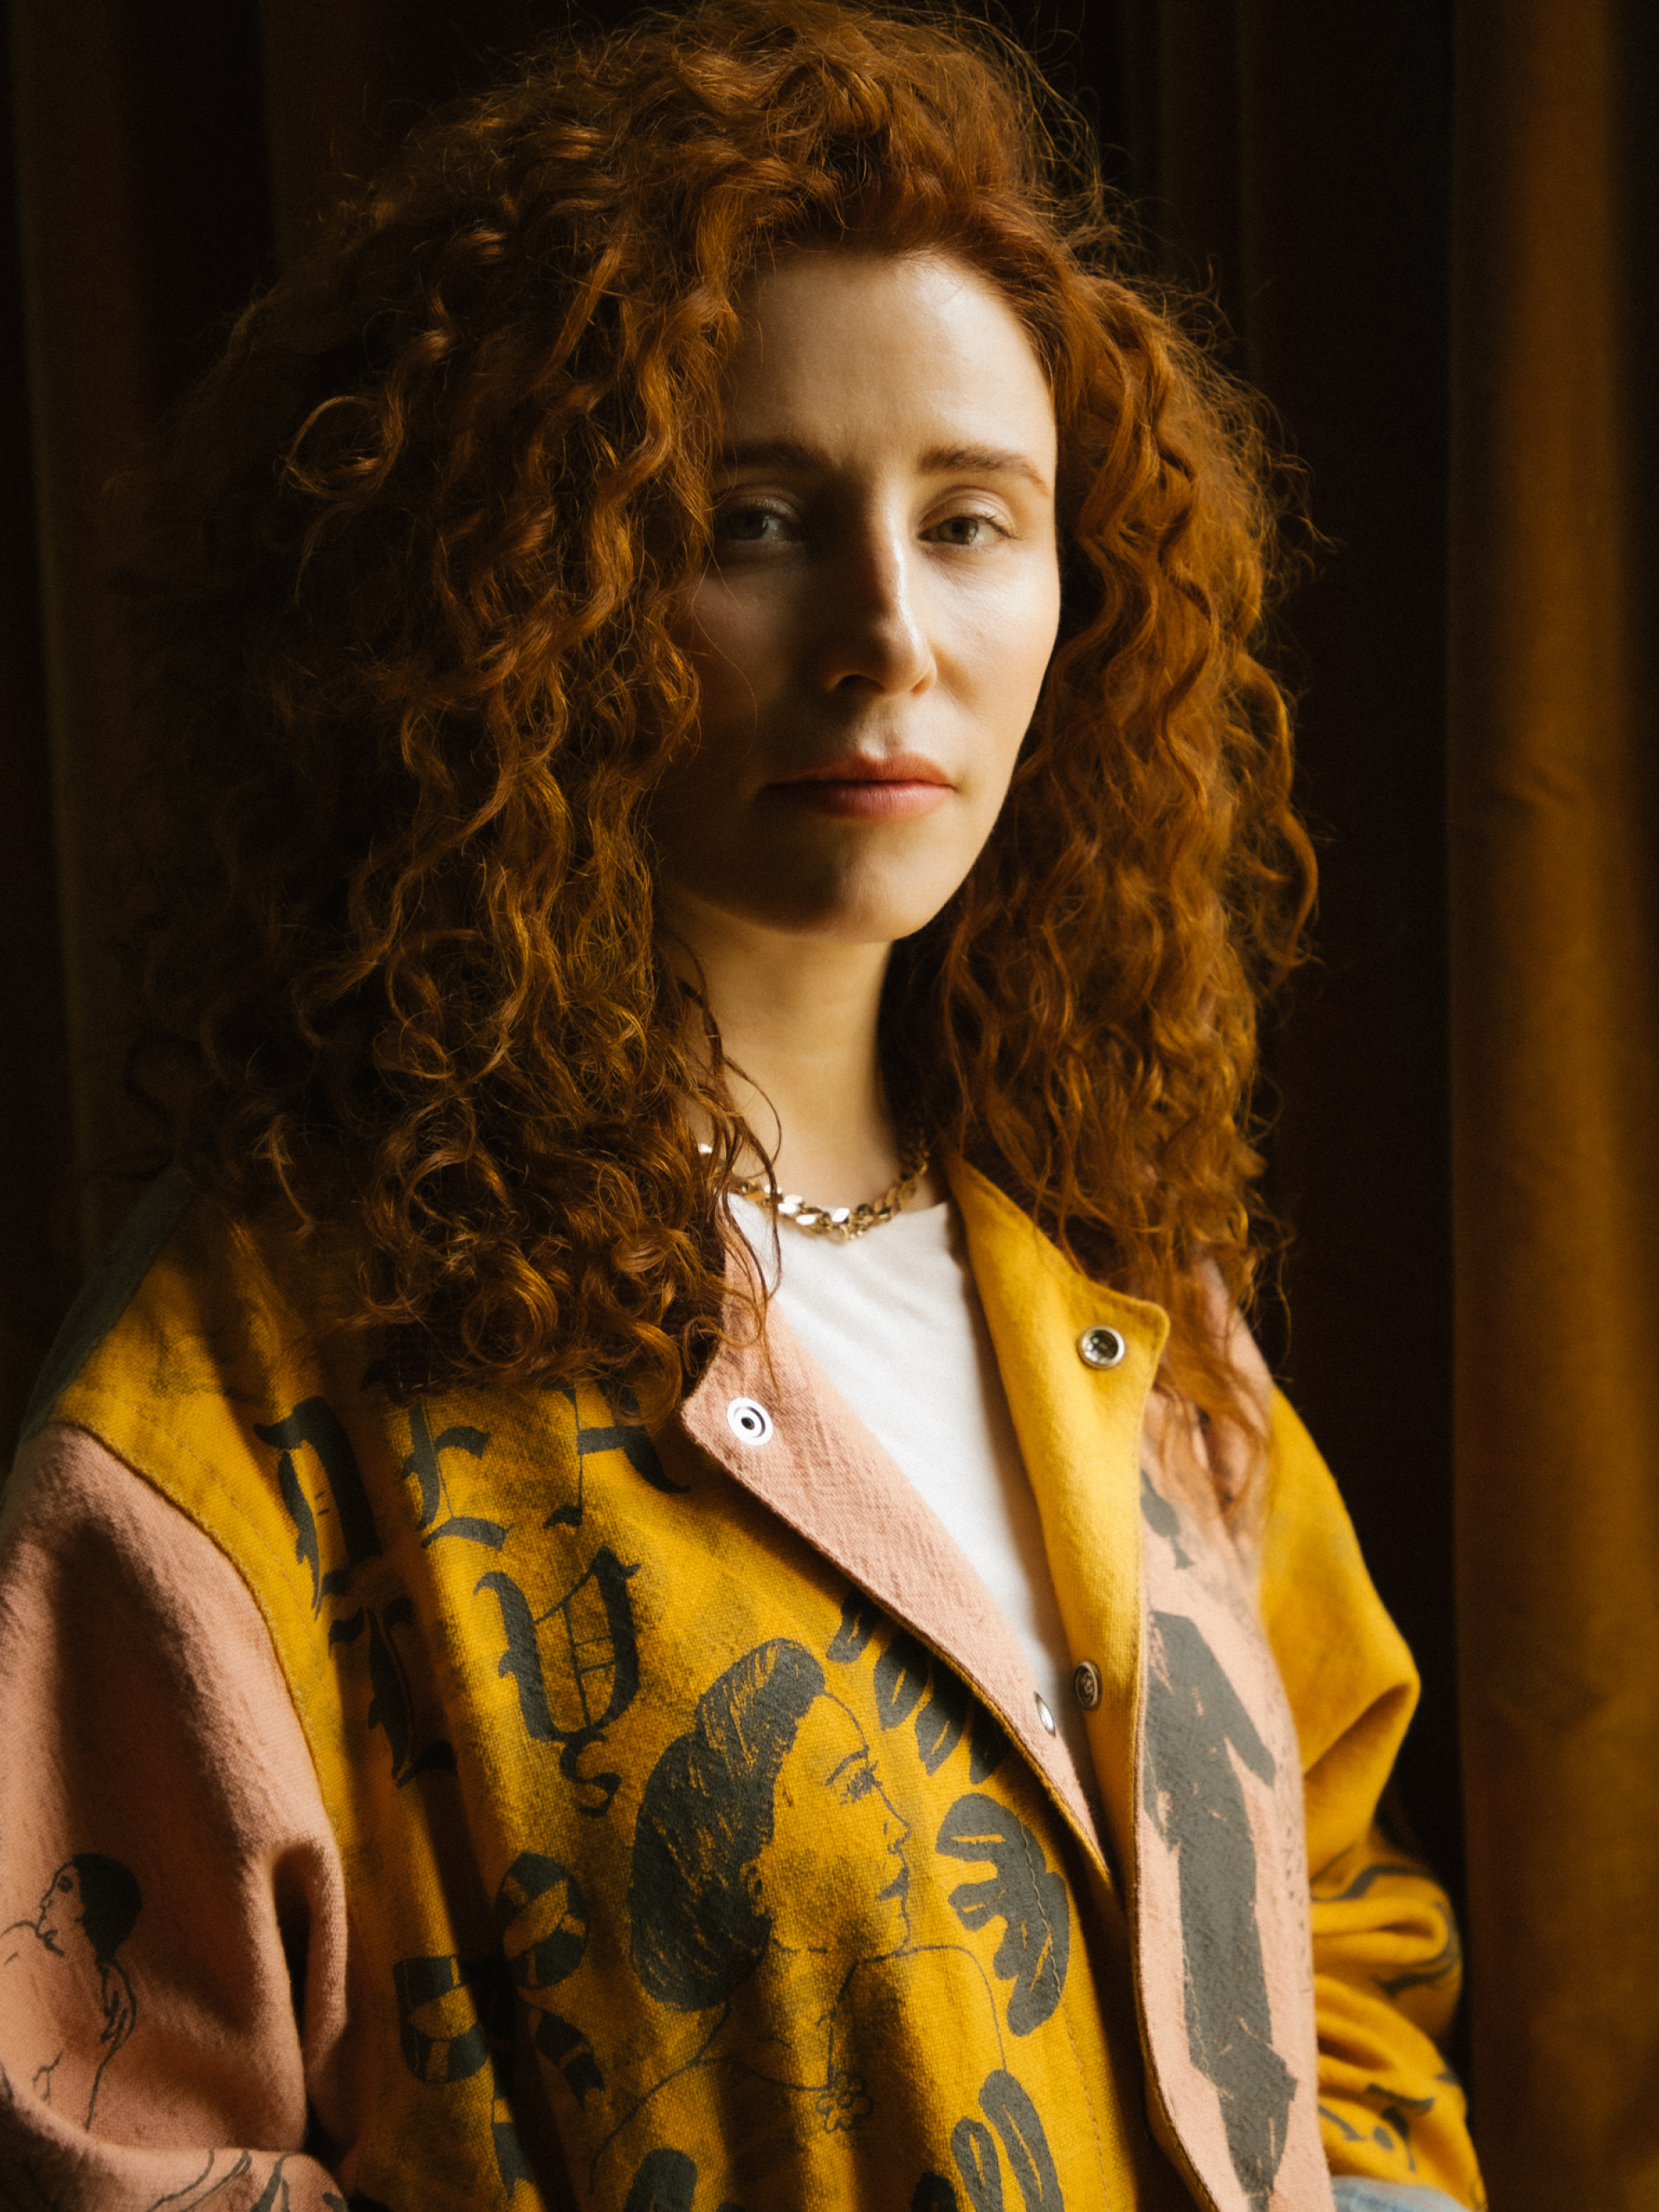 A woman with curly red hair in a yellow jacket.